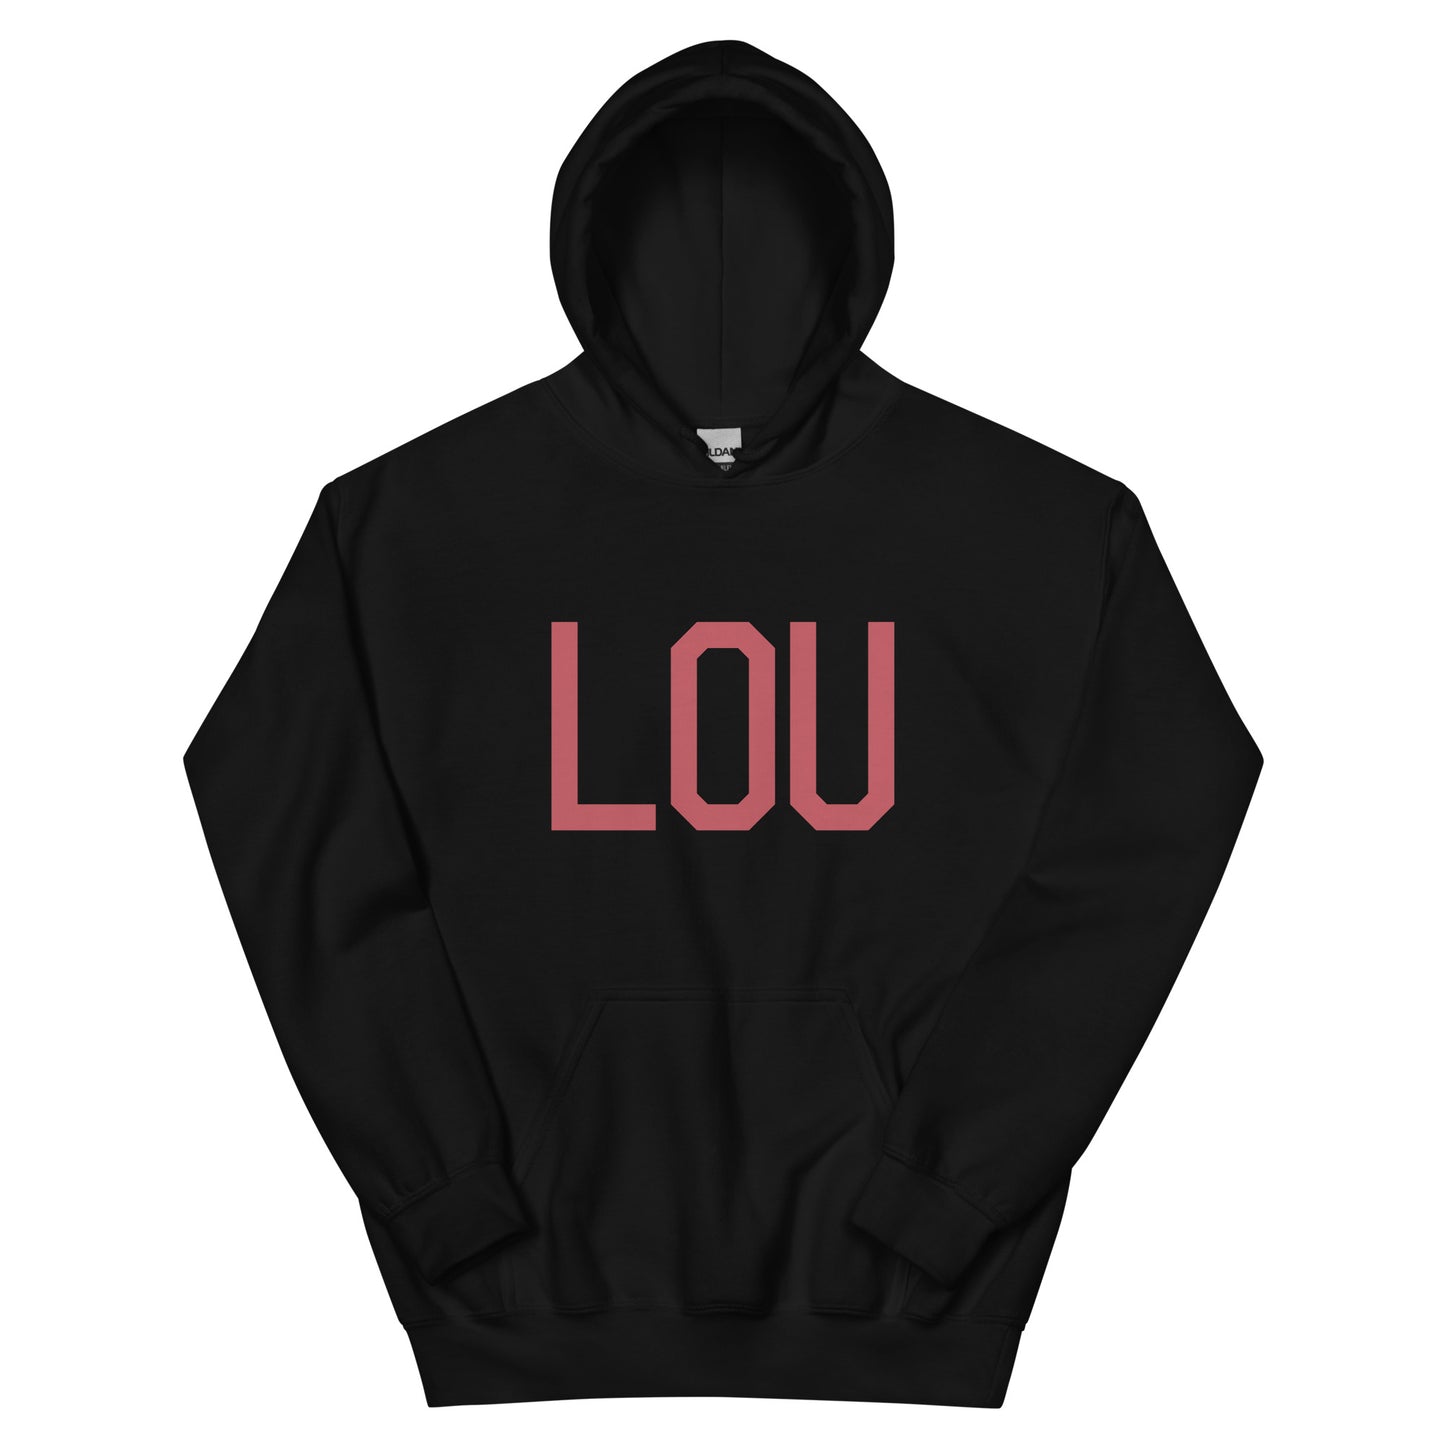 Aviation Enthusiast Hoodie - Deep Pink Graphic • LOU Louisville • YHM Designs - Image 01